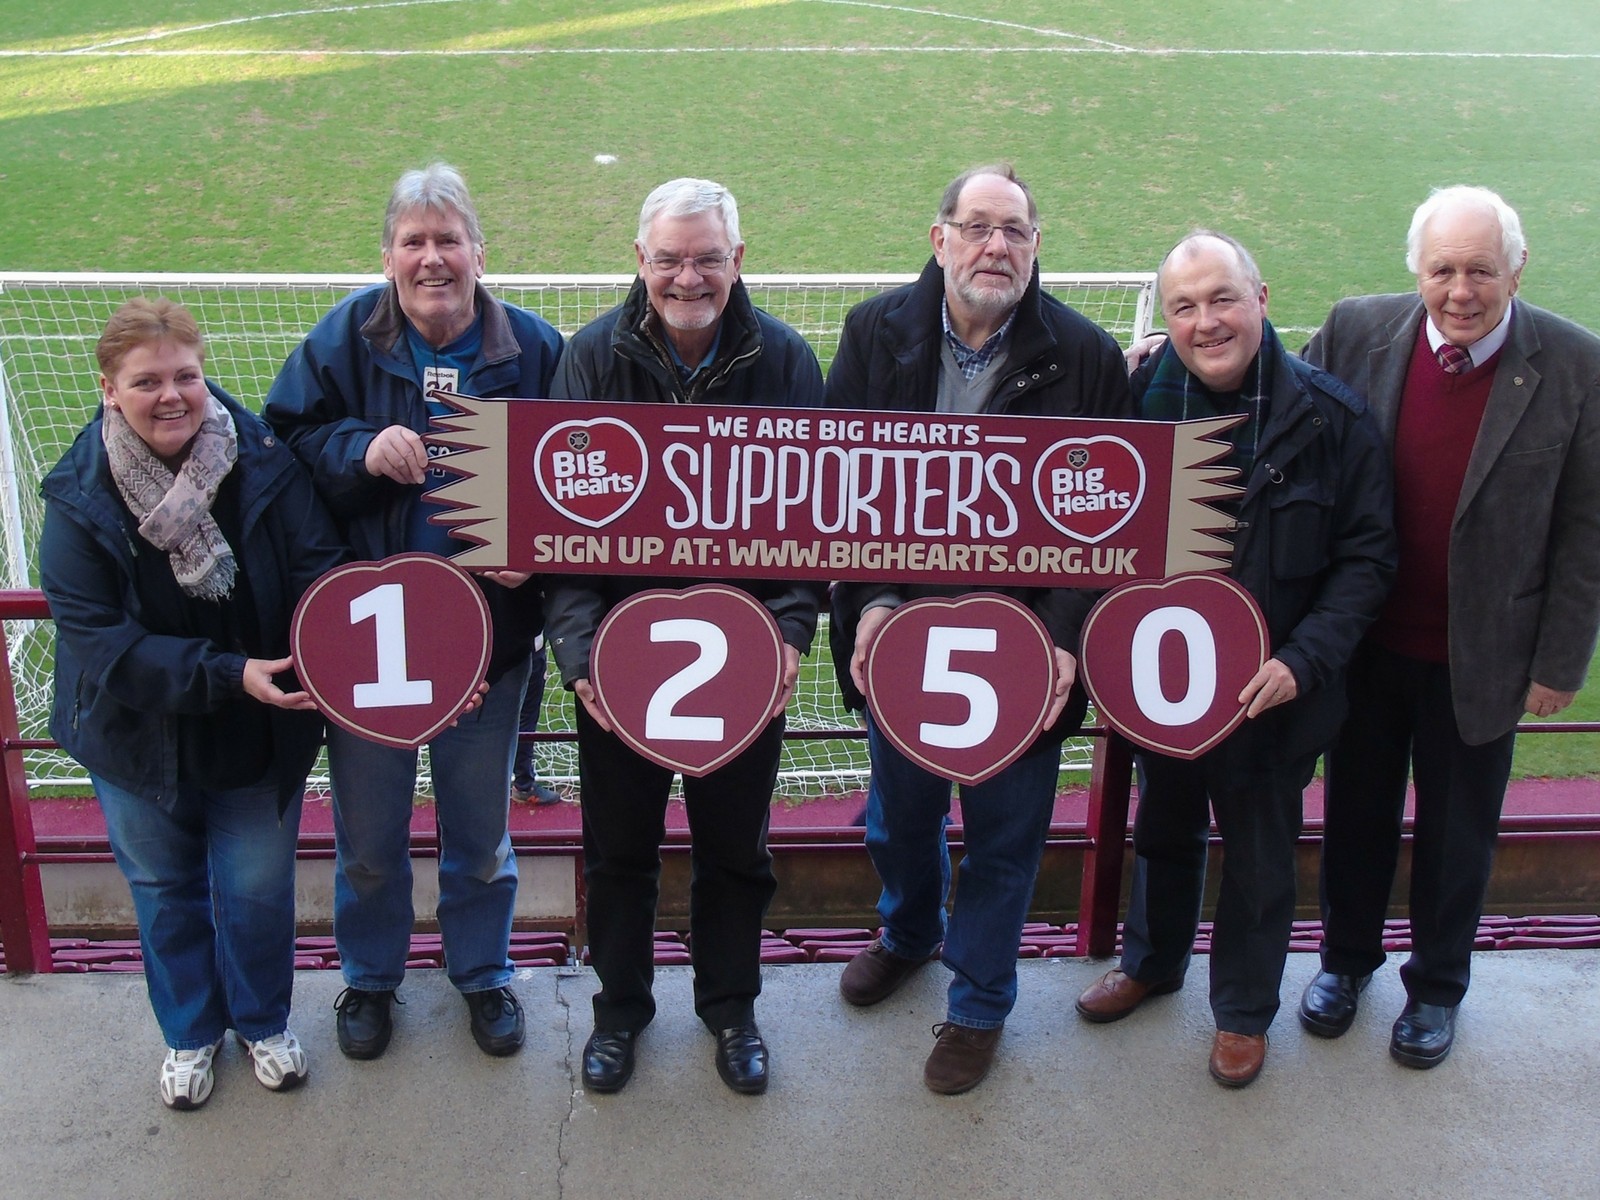  » Over 1250 Big Hearts Supporters Helping make a BIG Difference!